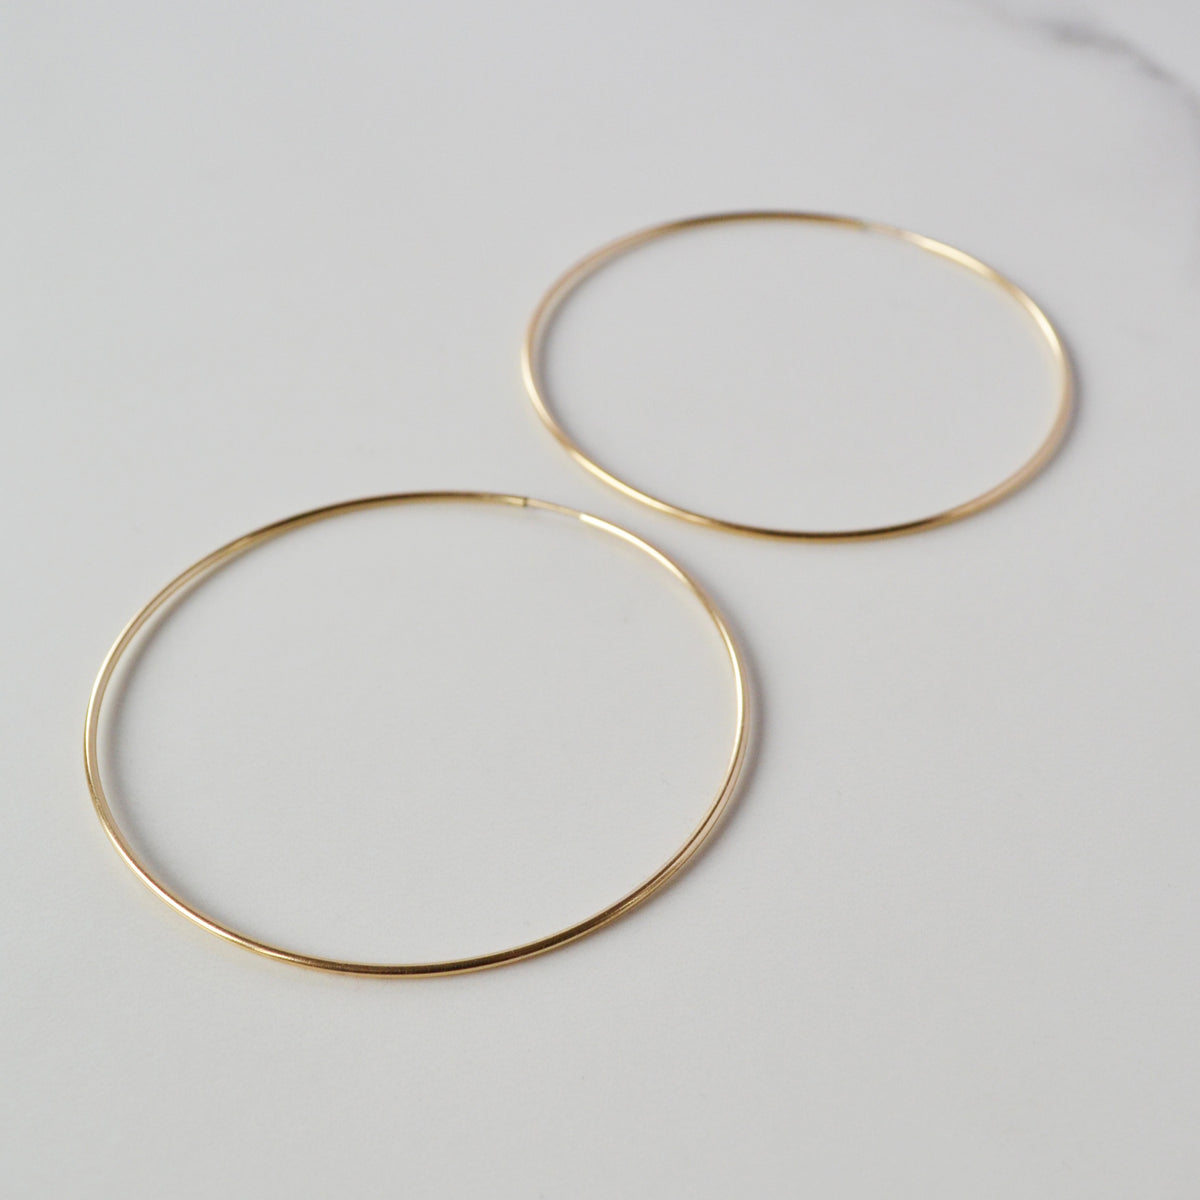 Thin Endless Hoop Earrings, Gold or Rose Gold